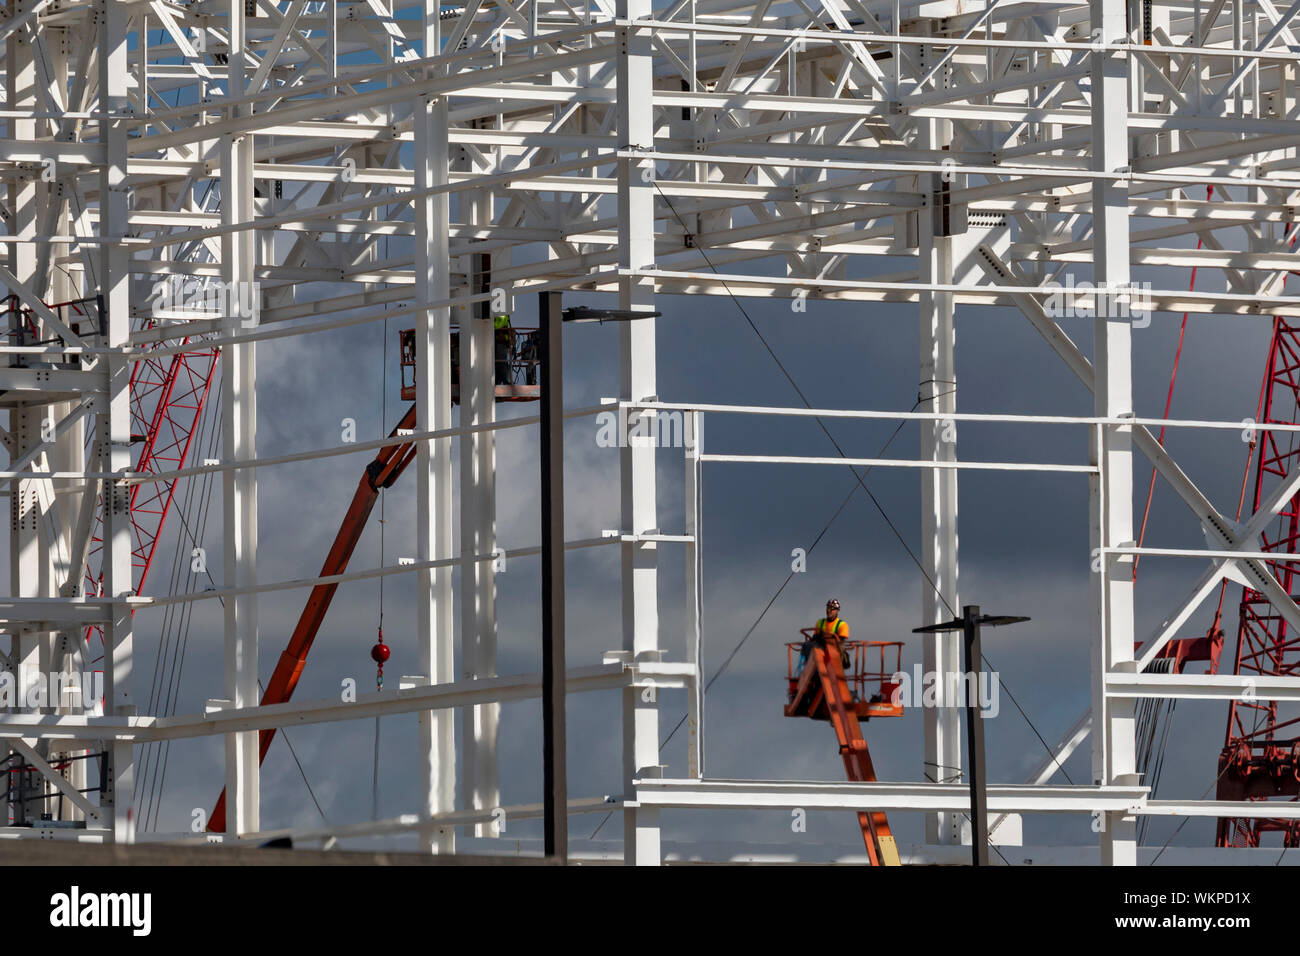 Detroit, Michigan - Construction of the paint shop for a new Fiat Chrysler auto assembly plant on the east side of Detroit. The plant will make the Je Stock Photo